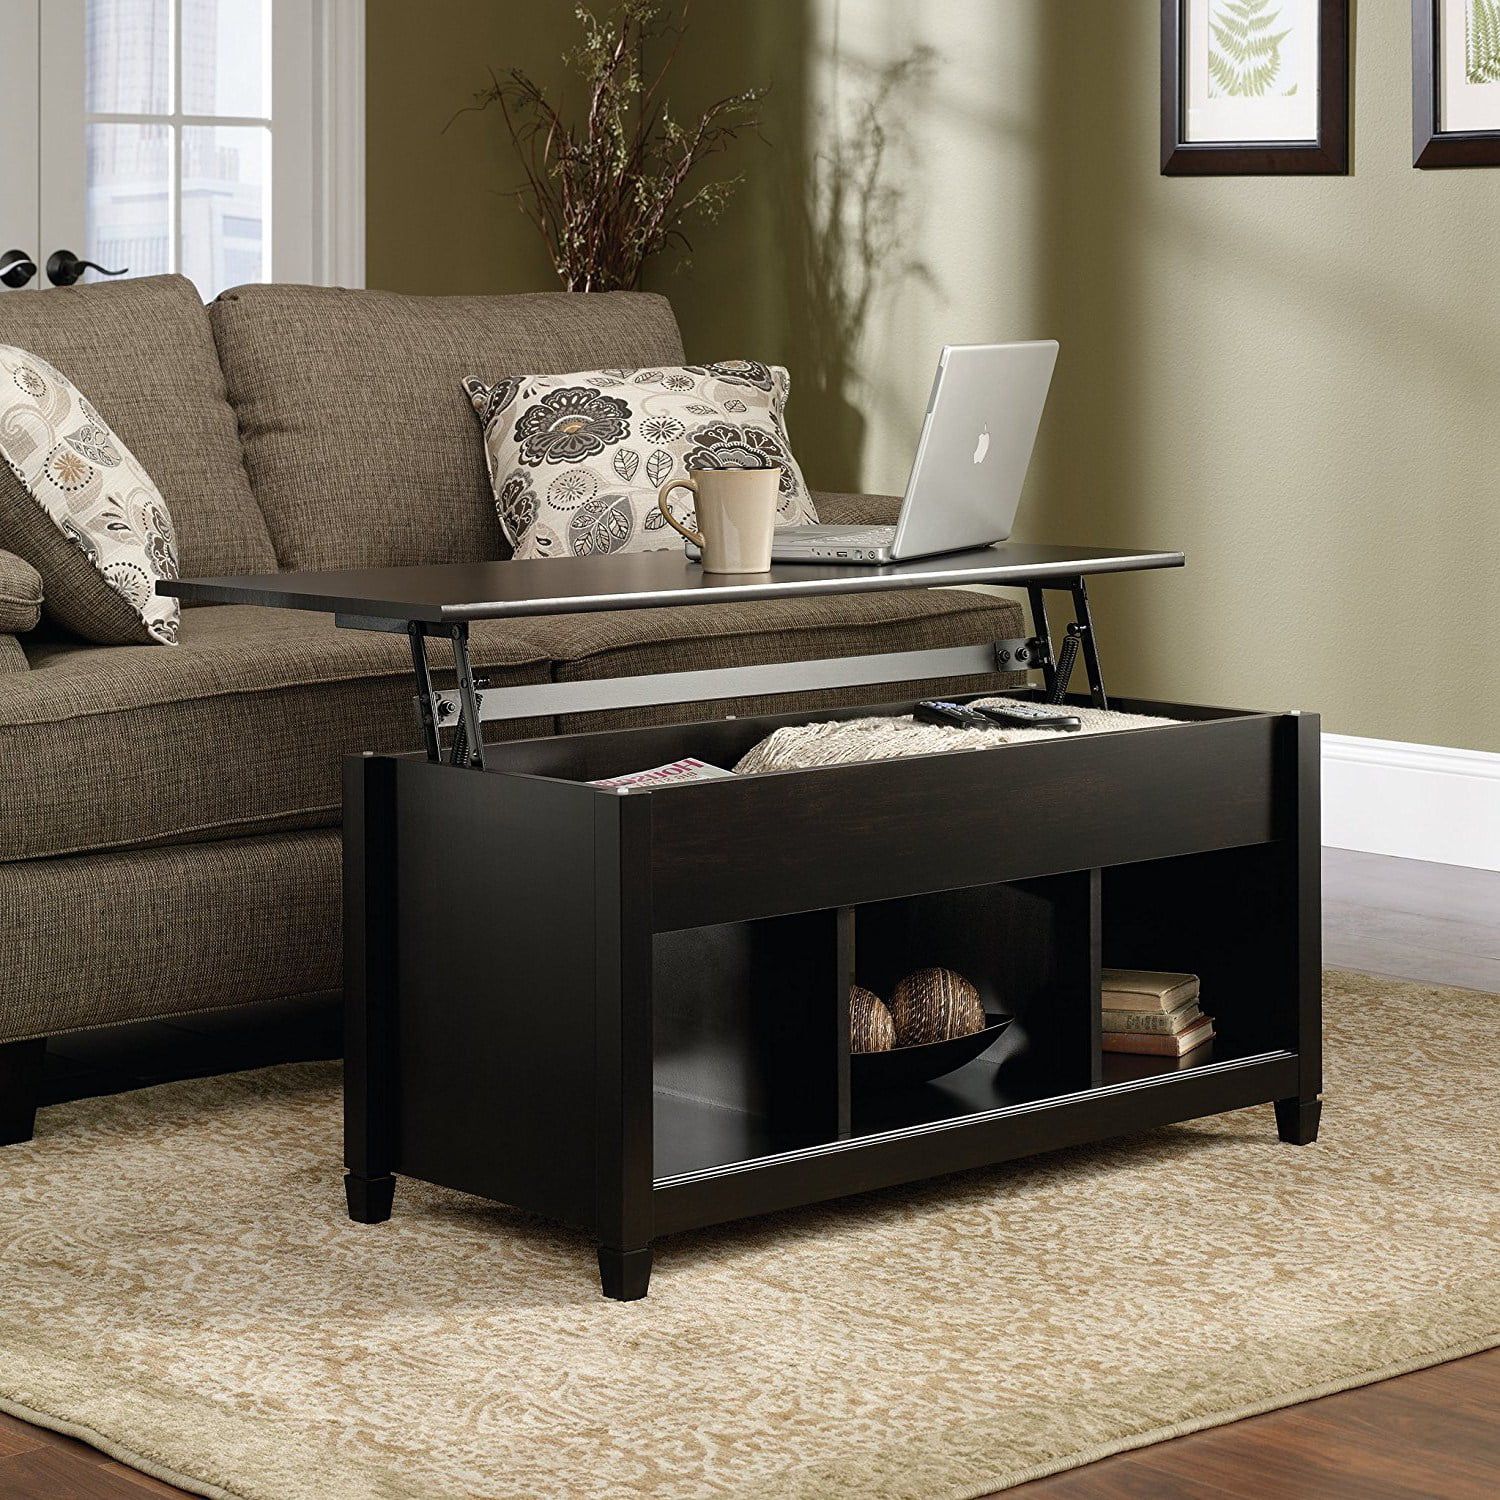 Zimtown Lift Up Top Coffee Table With Hidden Compartment End Rectangle Regarding Lift Top Coffee Tables With Shelves (View 19 of 20)